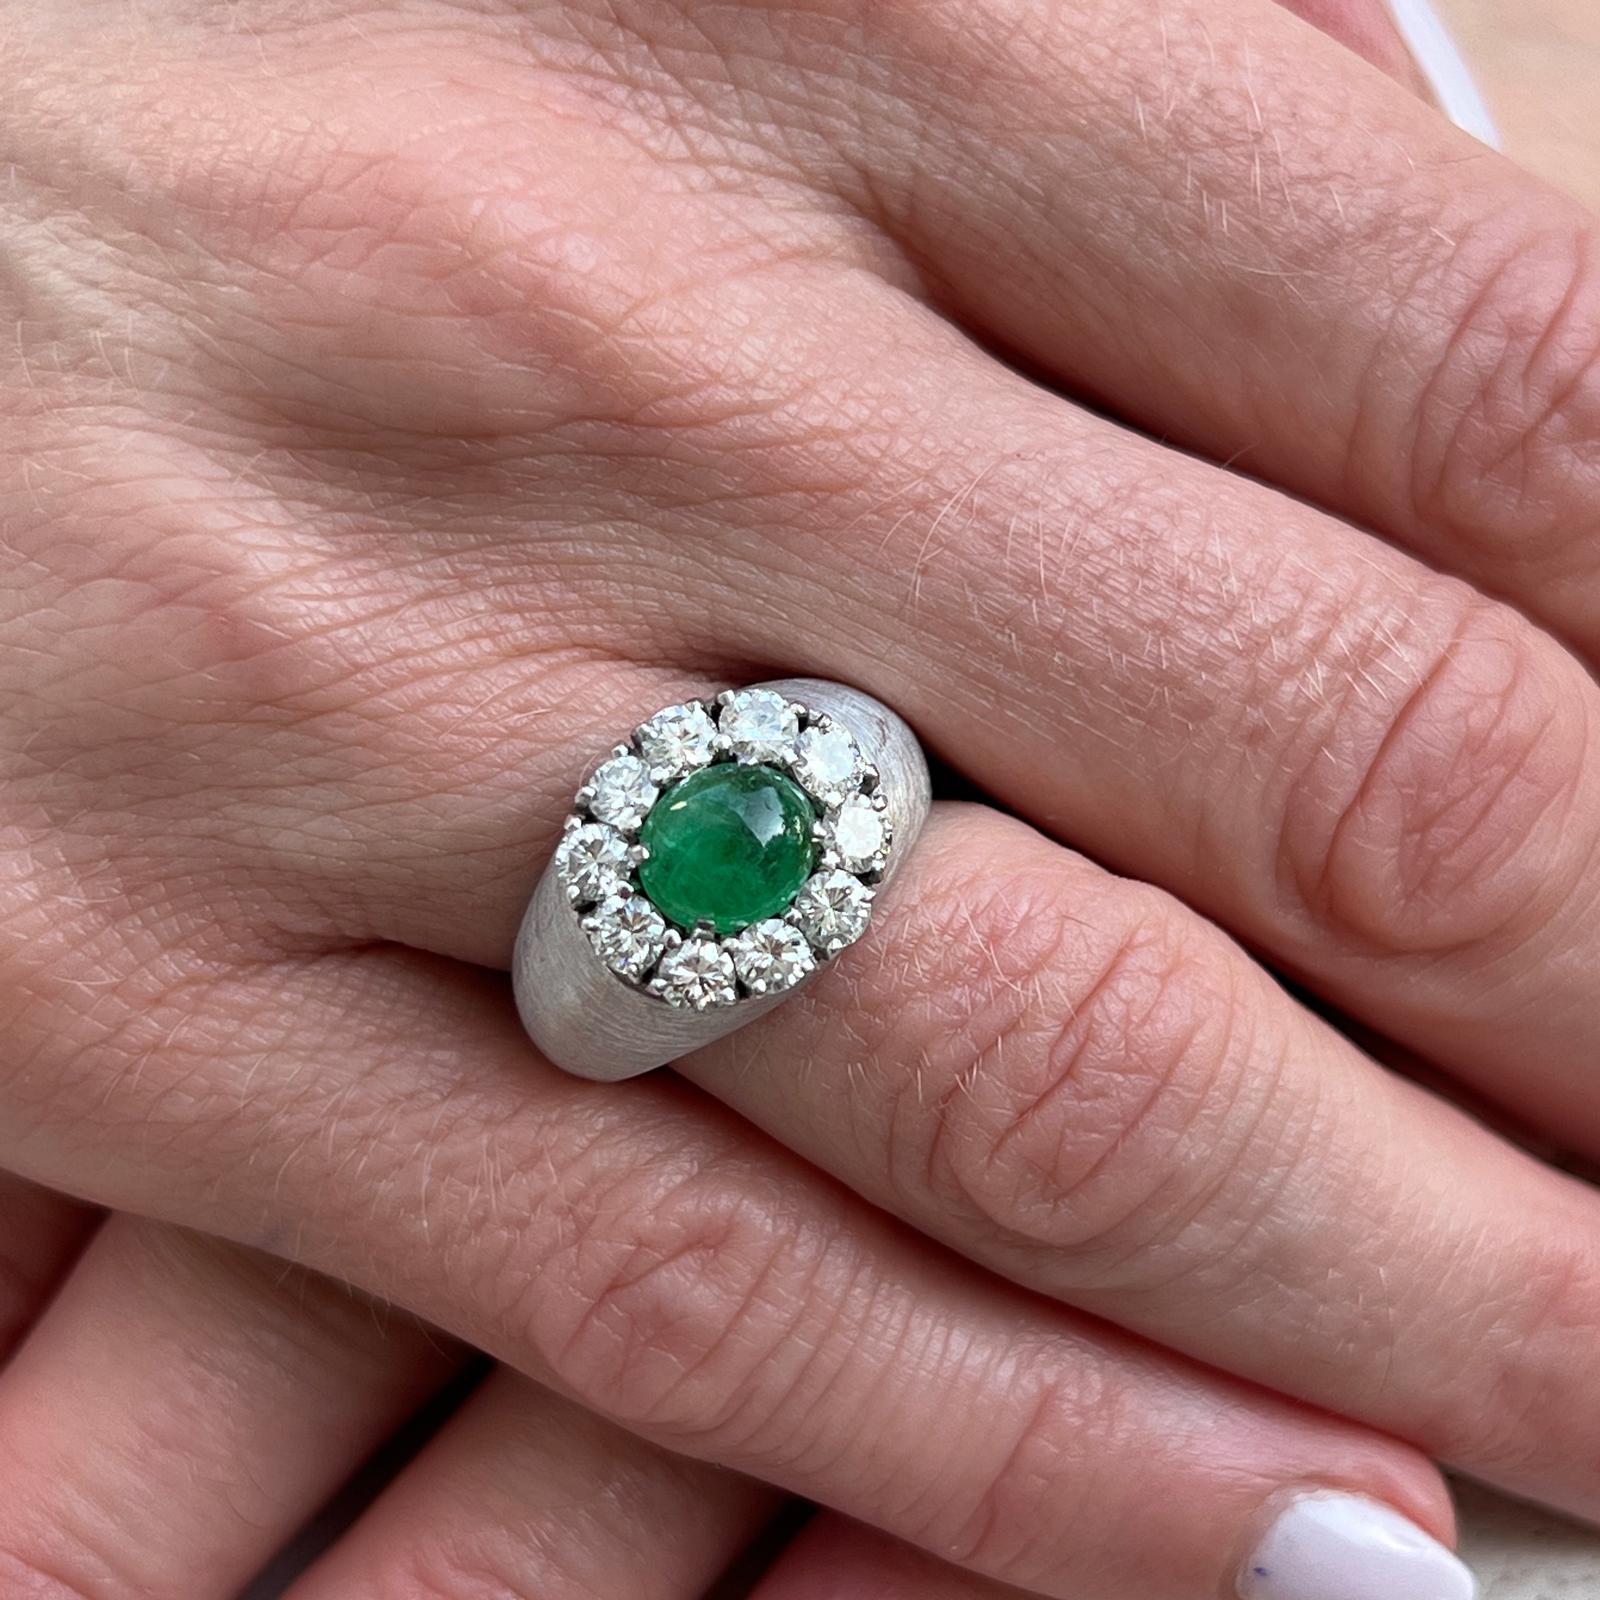 Diamond and emerald cocktail ring crafted in satin finish 14 karat white gold. The cabochon natural emerald weighs 1.12 carats. Ten round brilliant cut diamonds weigh approximately 1.40 carat total weight and are graded F-G color and VS clarity. The